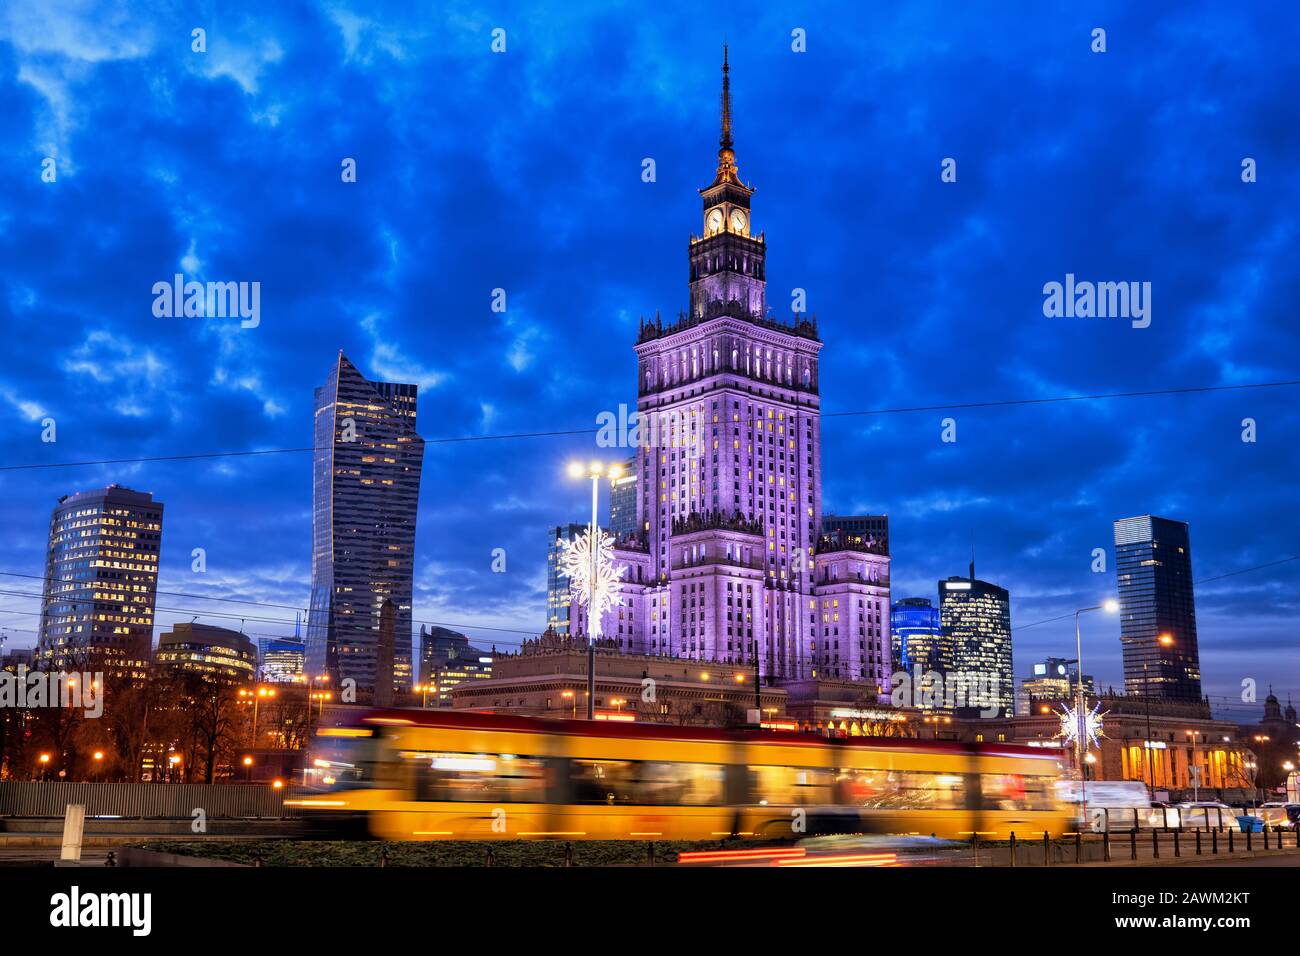 City centre of Warsaw in Poland at evening twilight, downtown skyline with Palace of Culture and Science. Stock Photo